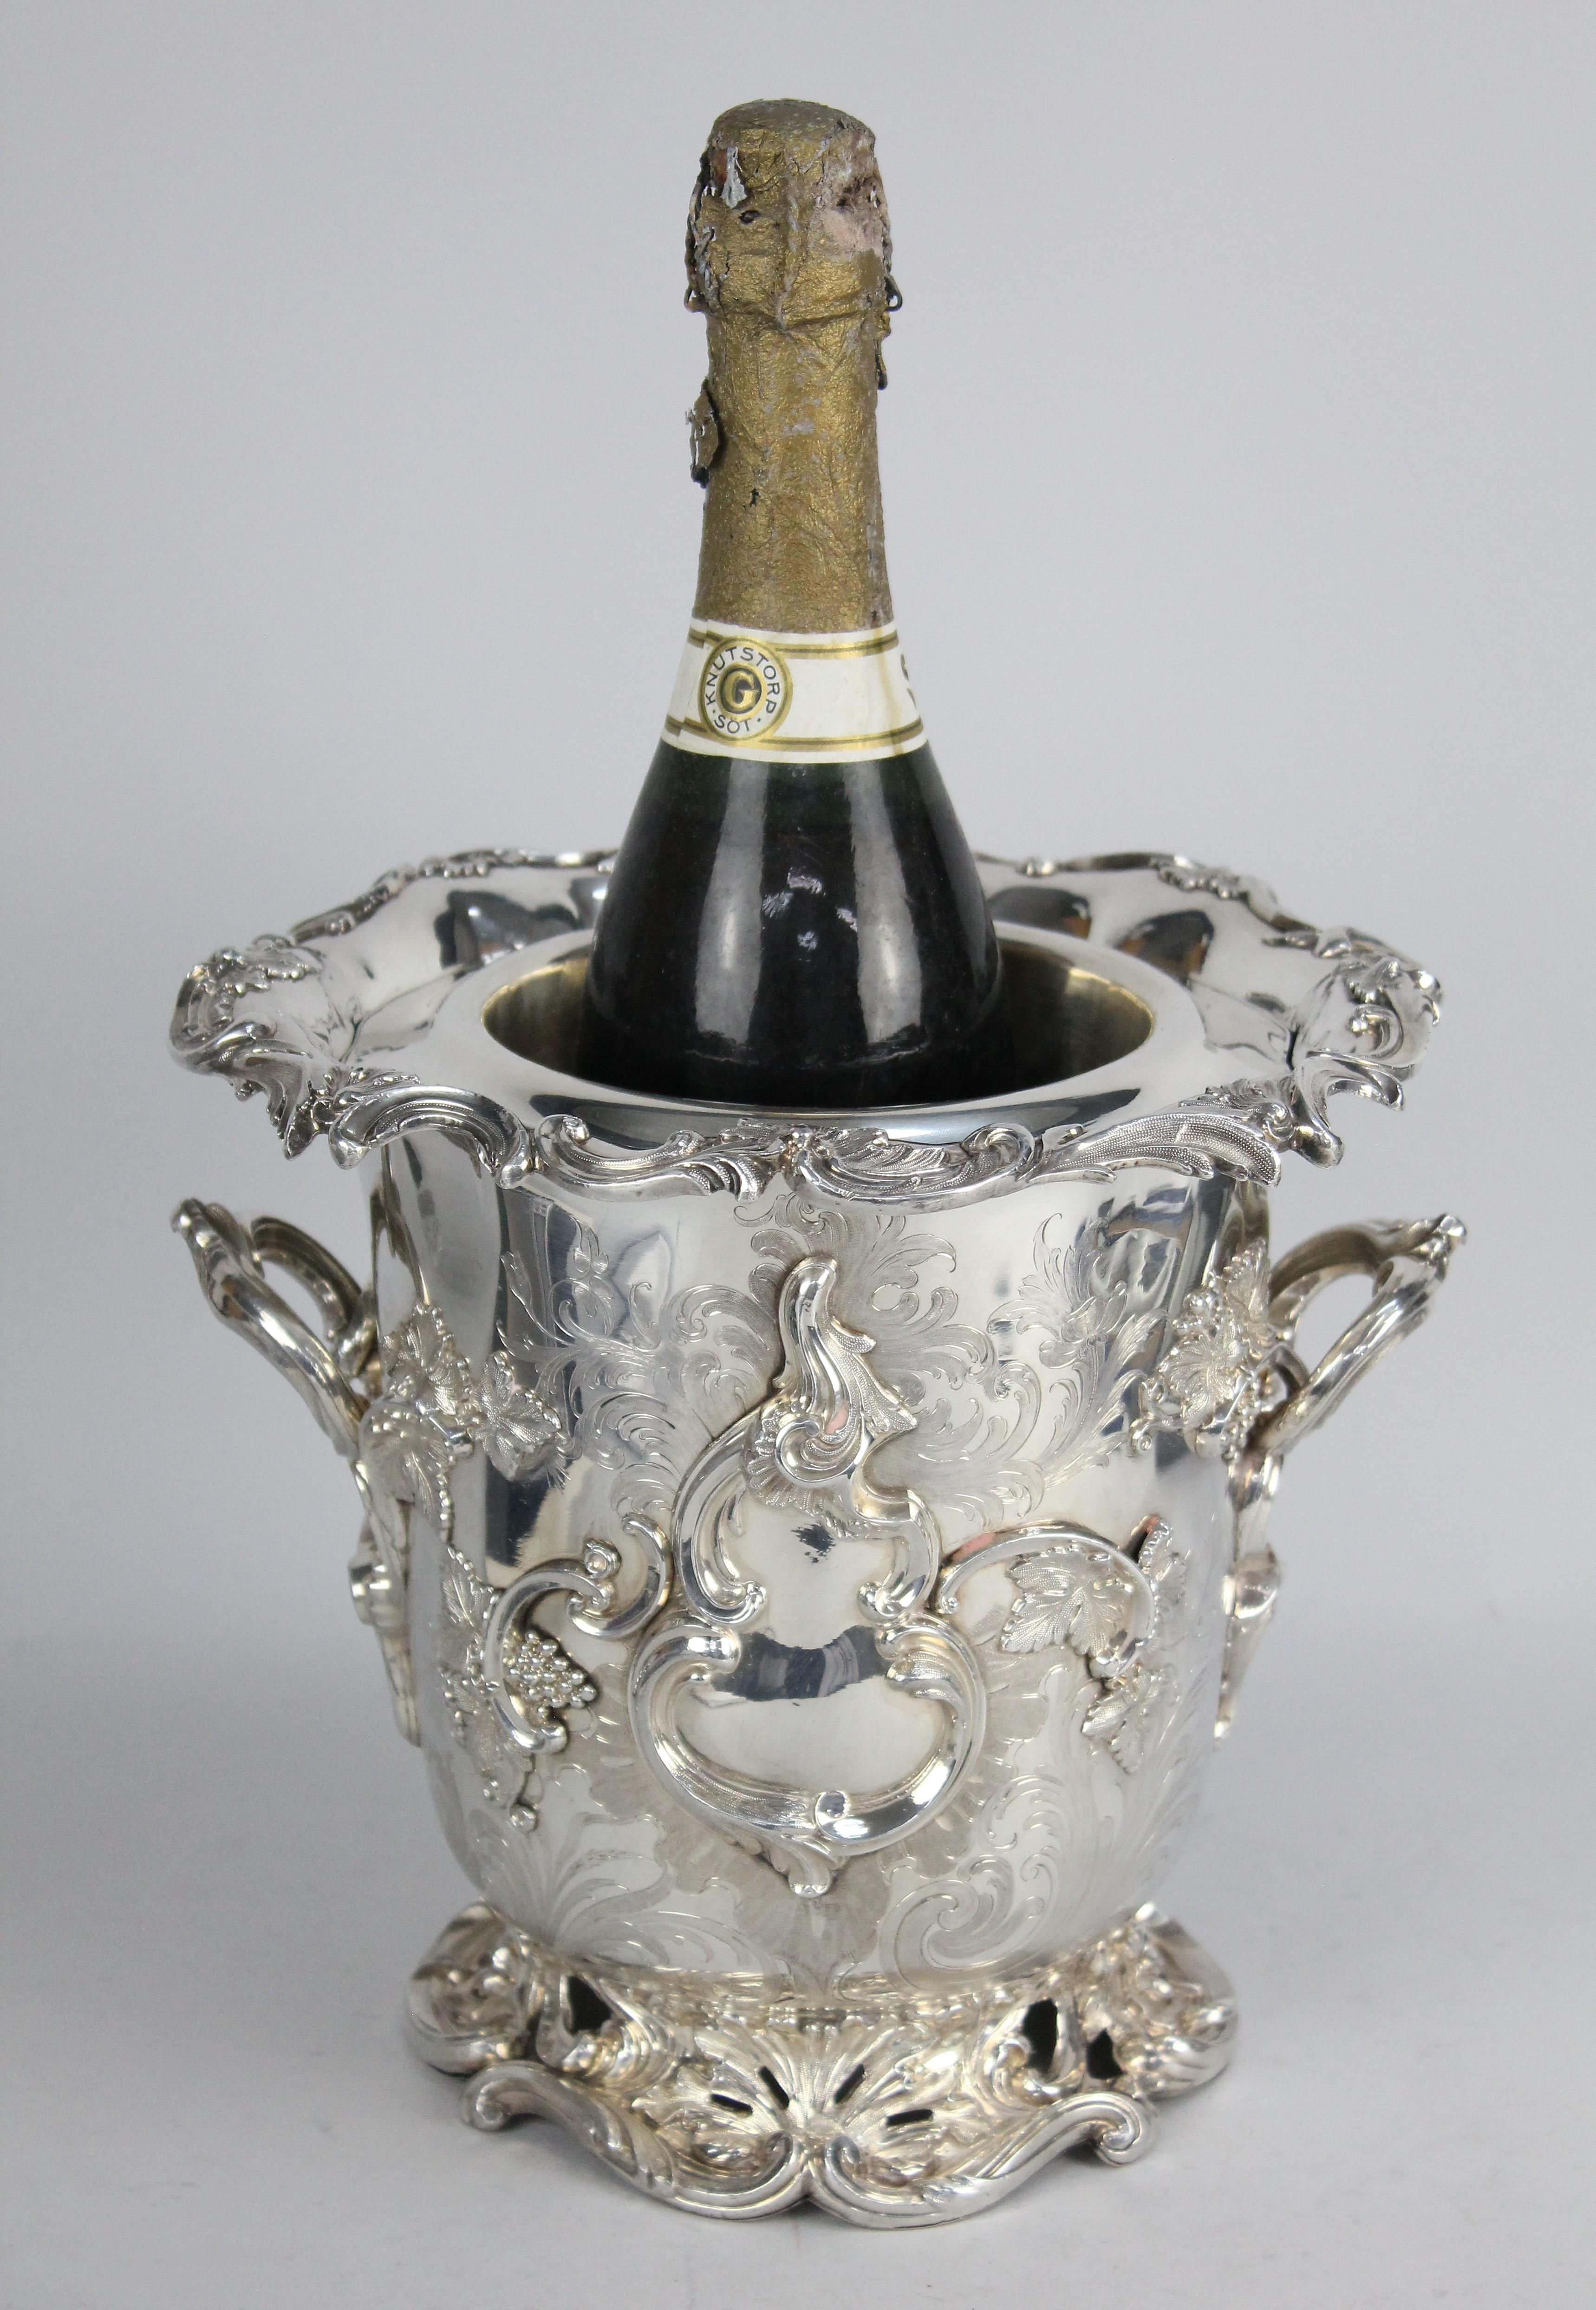 Henry Wilkinson & Co. magnificent champagne/wine cooler in silver plate.

Superb quality and in great original condition. No issues!
Marked with the 